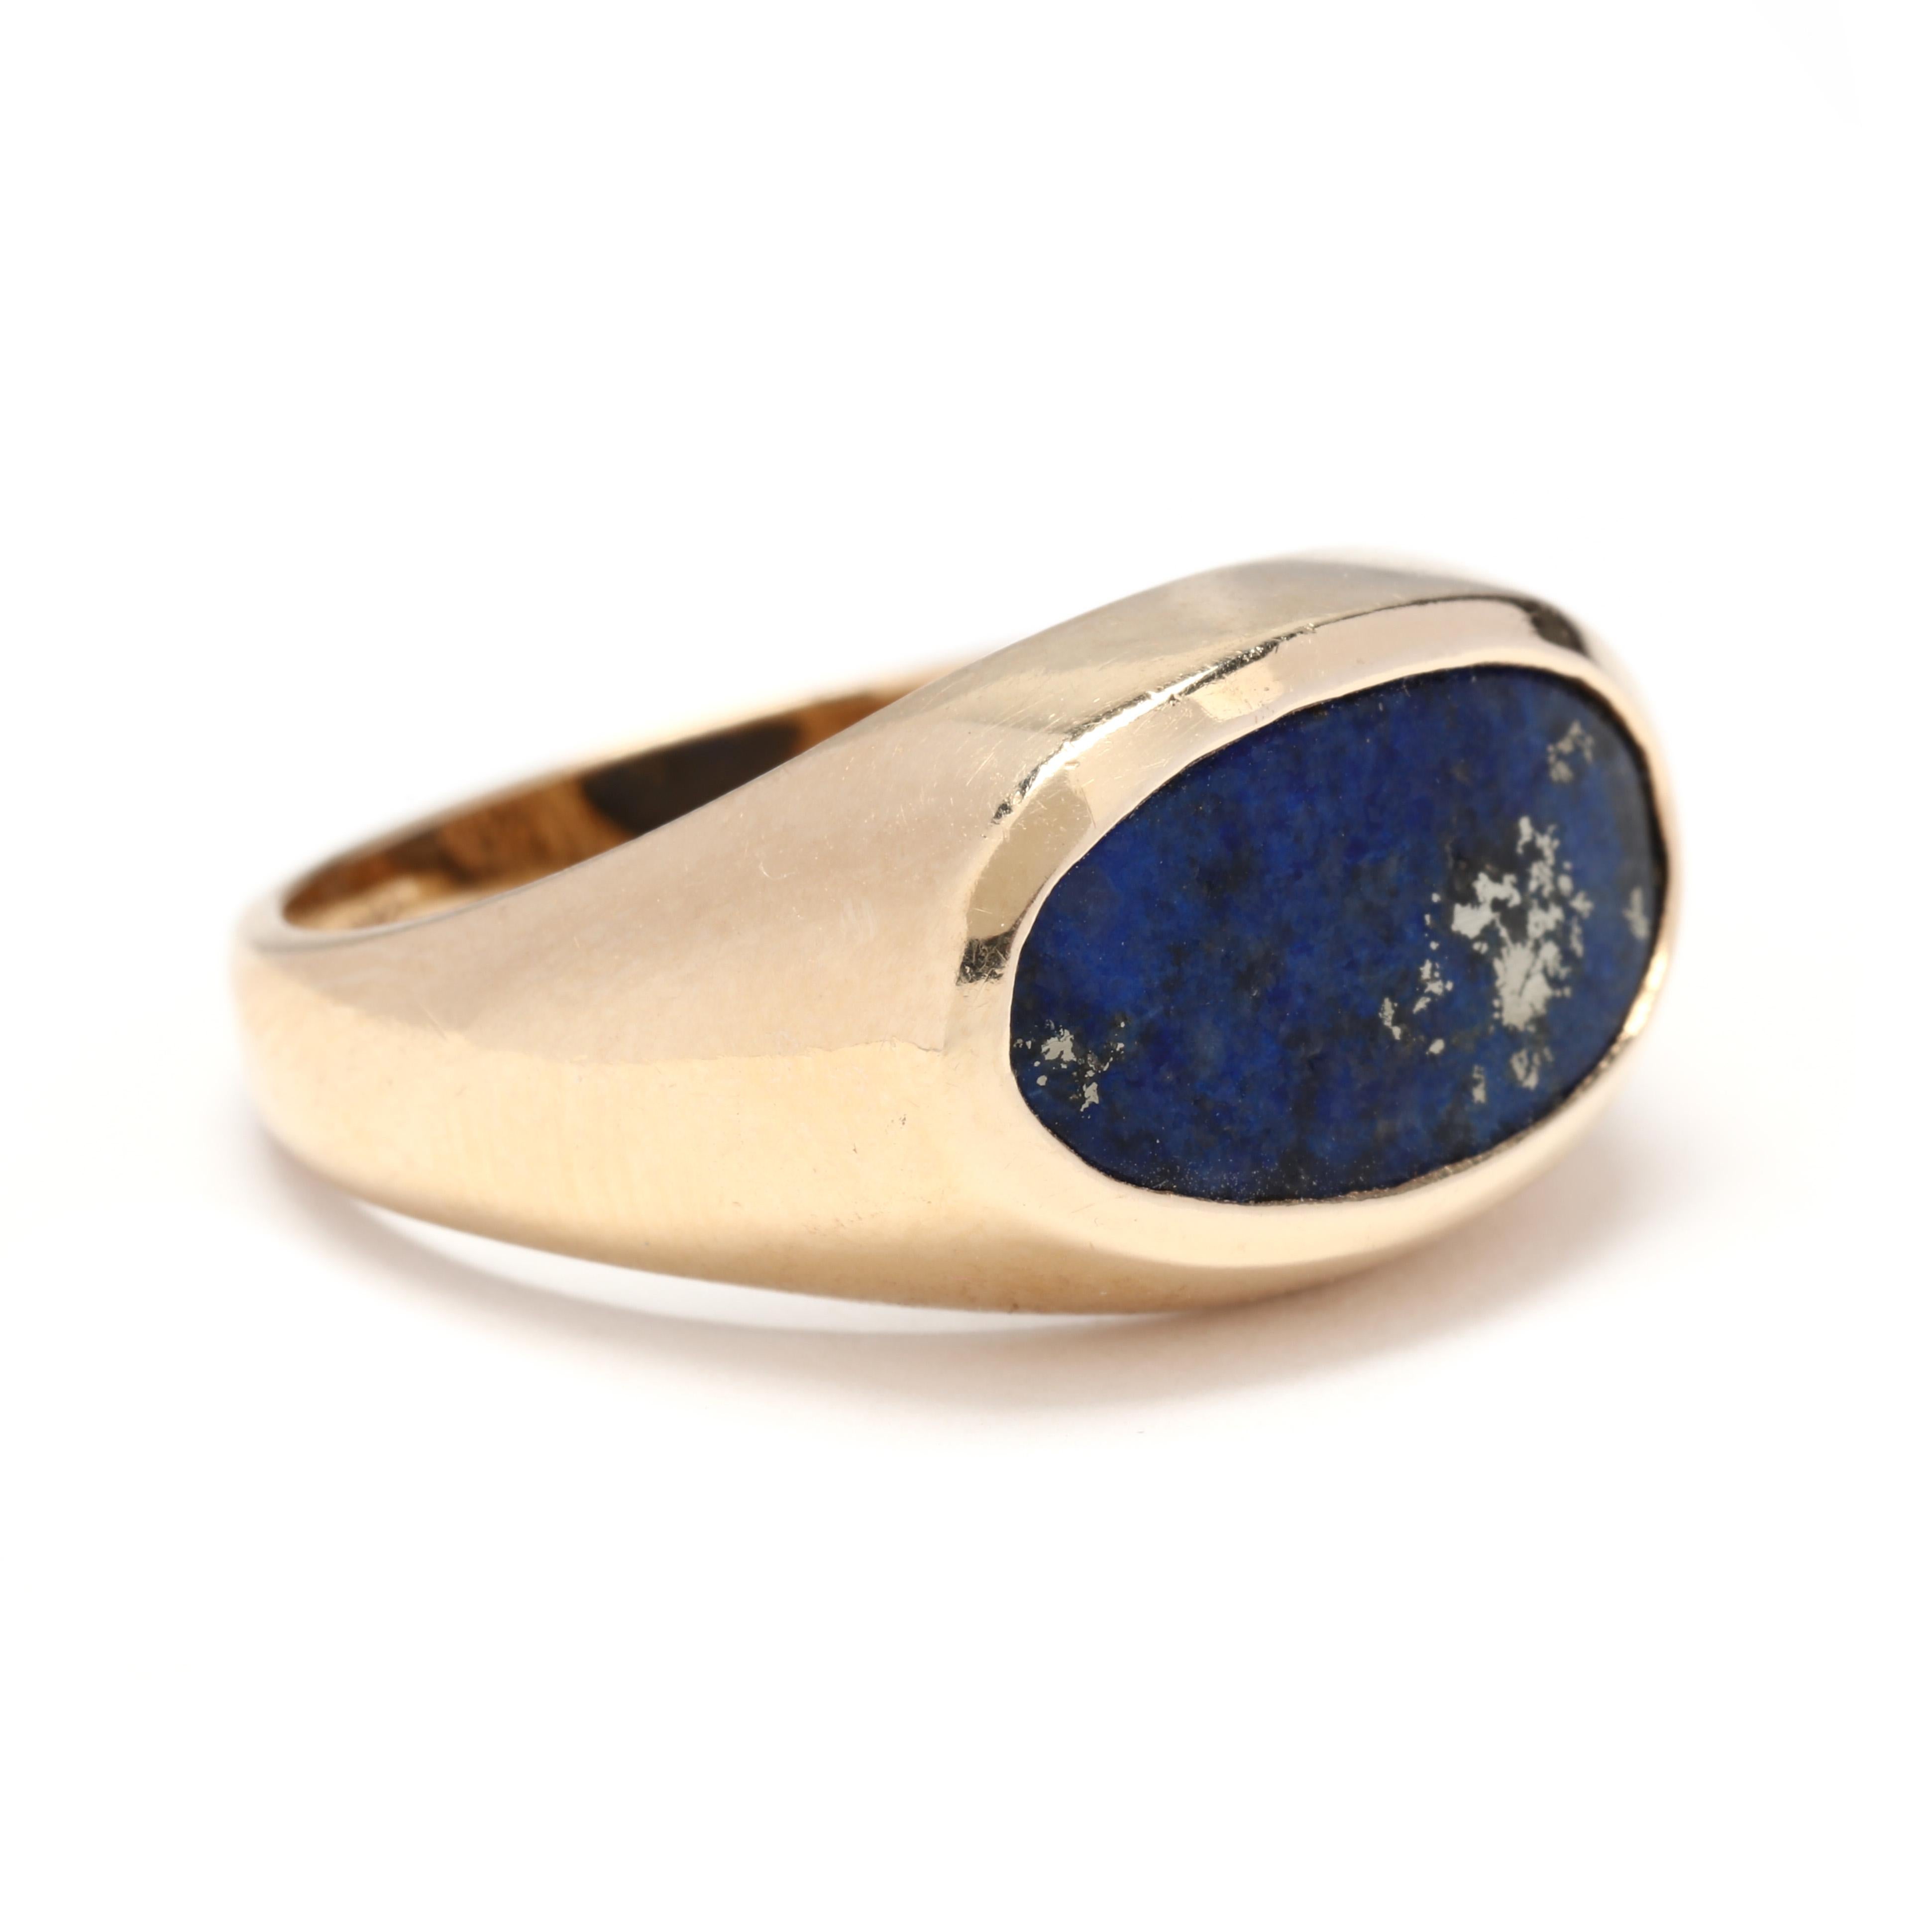 A vintage 14 karat yellow gold lapis signet saddle ring. This ring features a bezel set, horizontal oval lapis that is slightly curved and with a tapered shank. This lapis is of a dark royal blue color with an attractive patch of pyrite